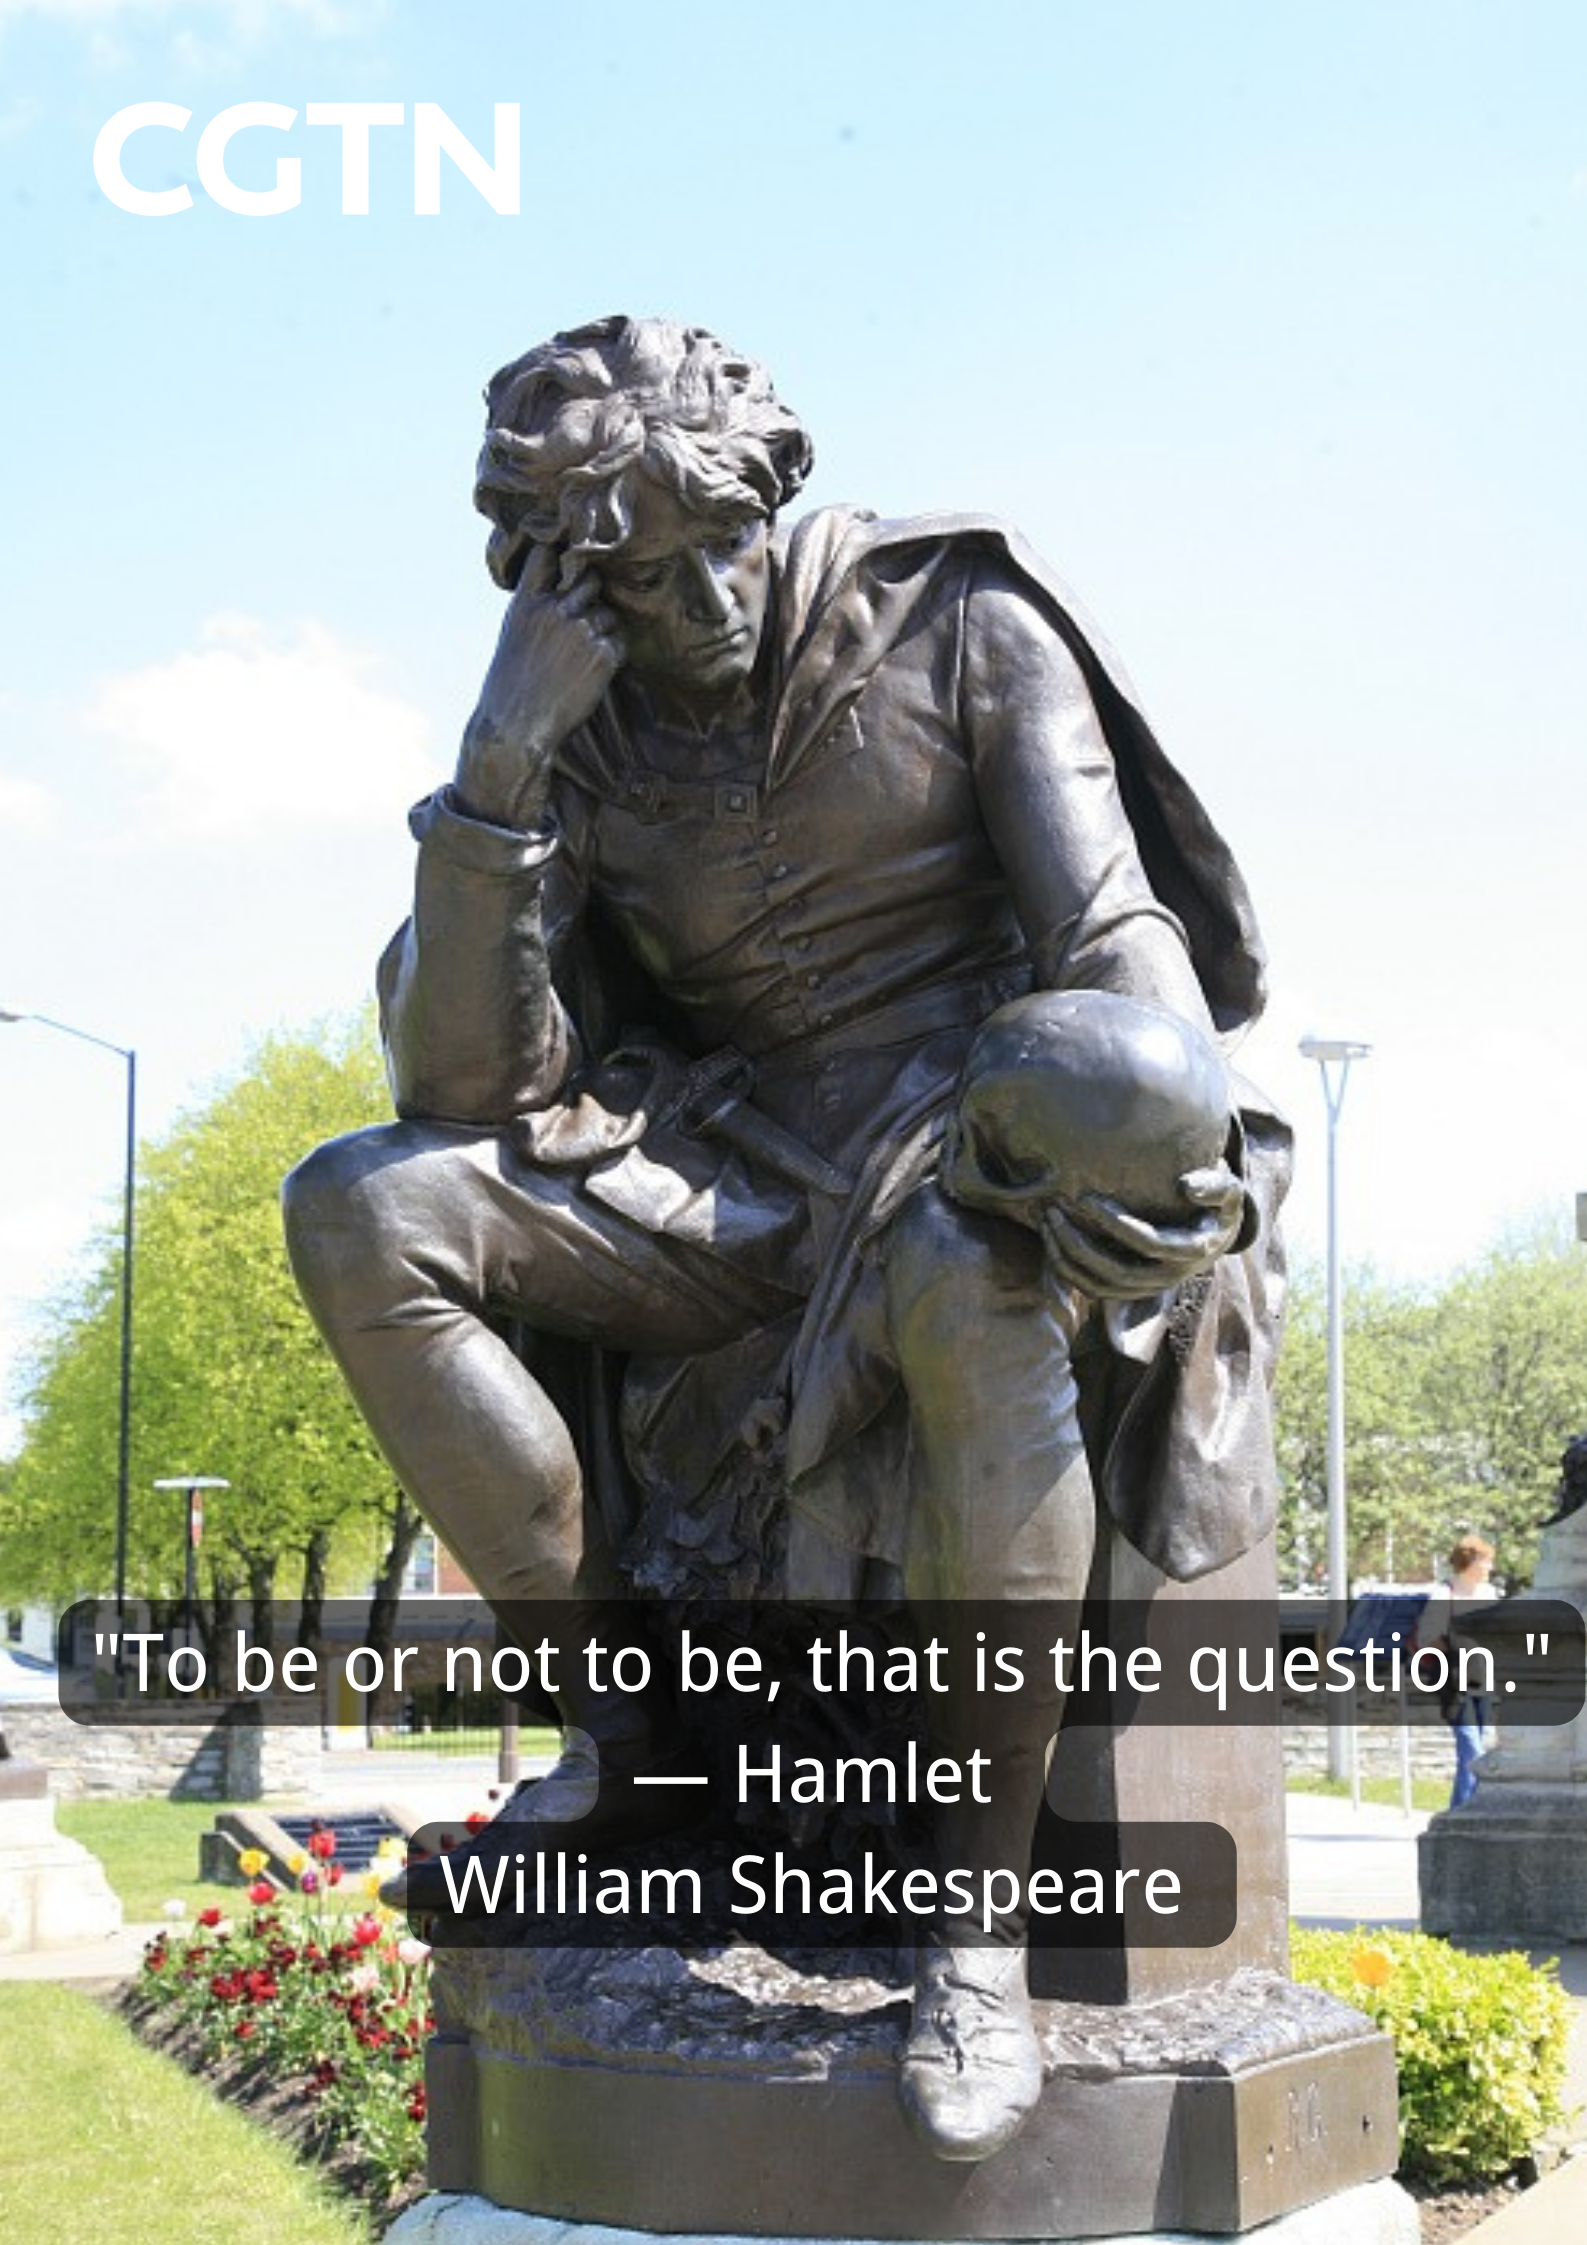 William Shakespeare's quote from 